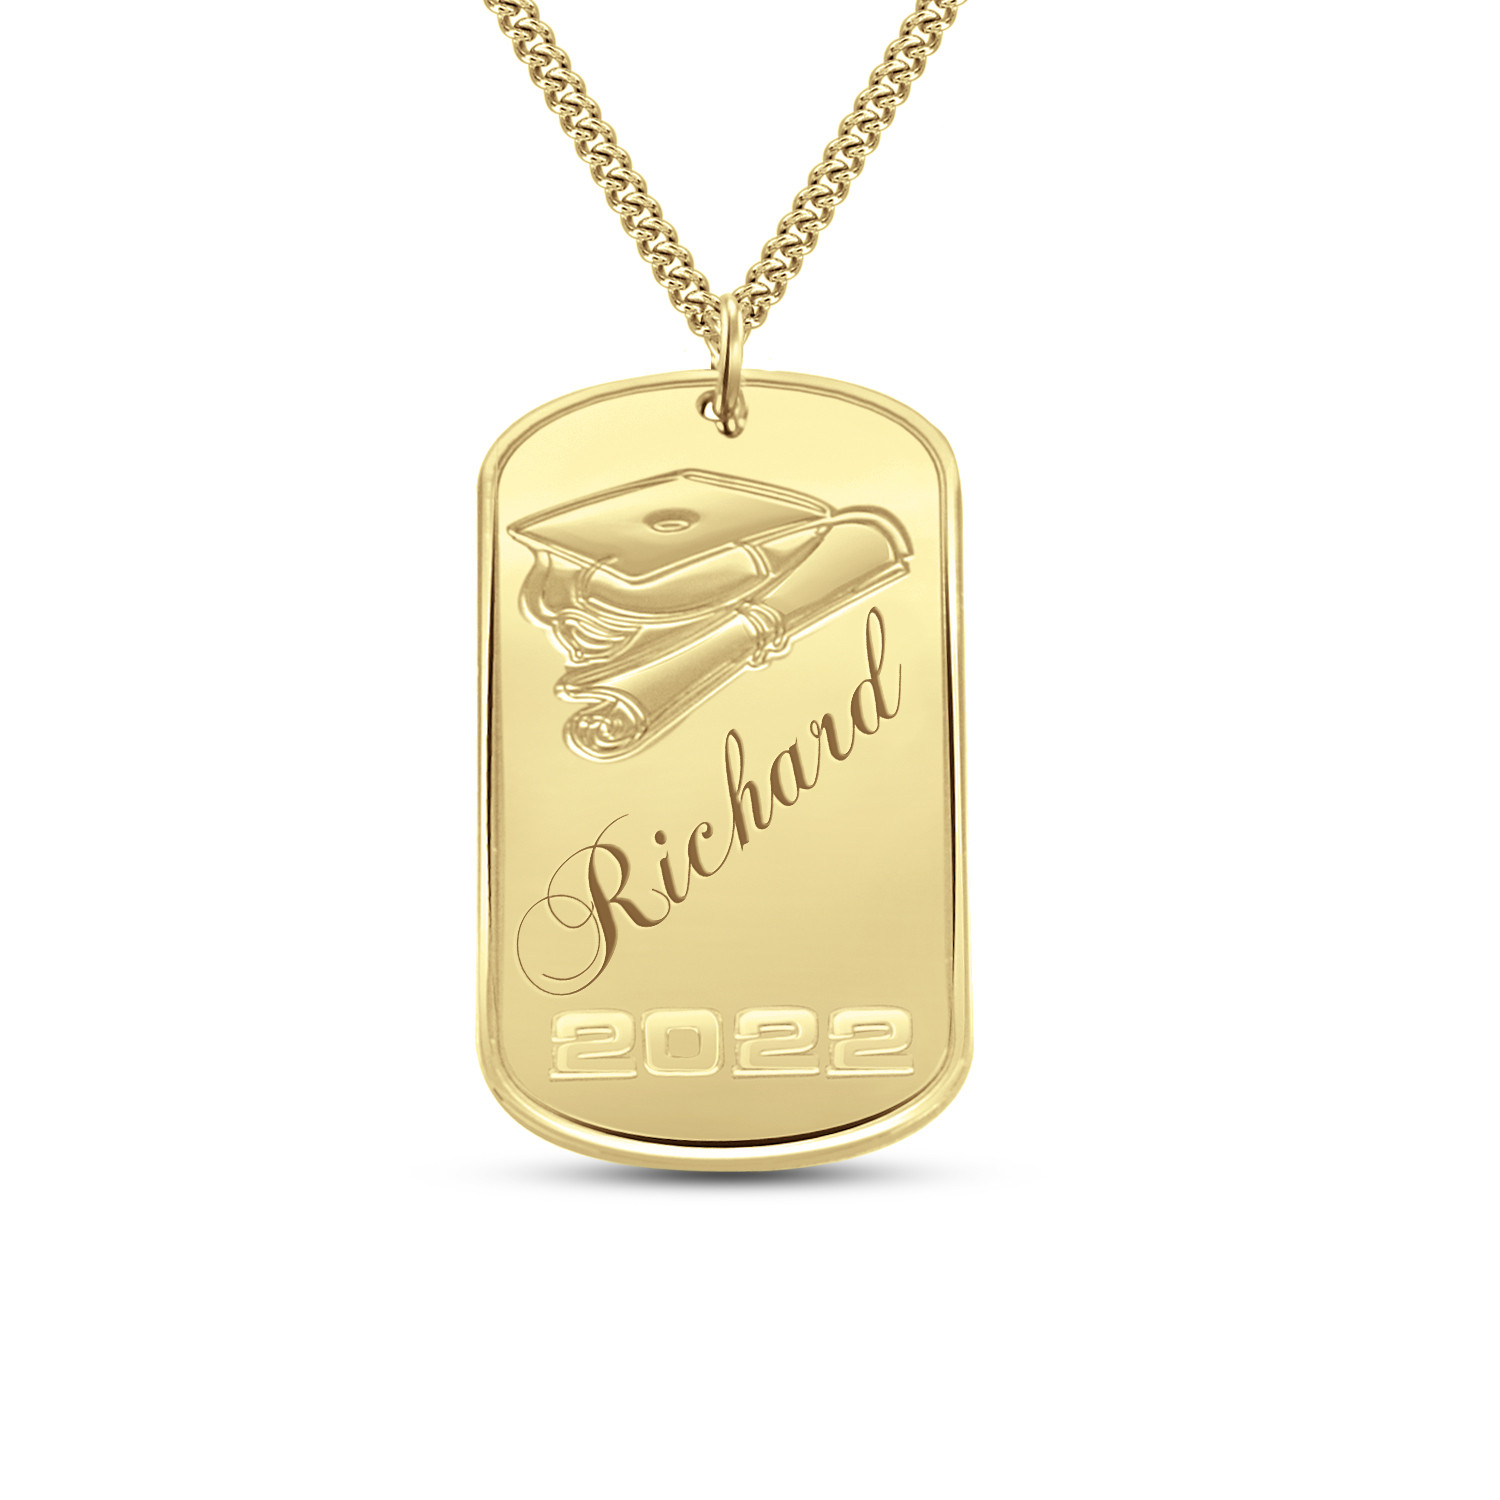 Zales Men's Extra Large Engravable Photo Dog Tag Pendant in 10K White or Yellow Gold (1 Image and 4 Lines)